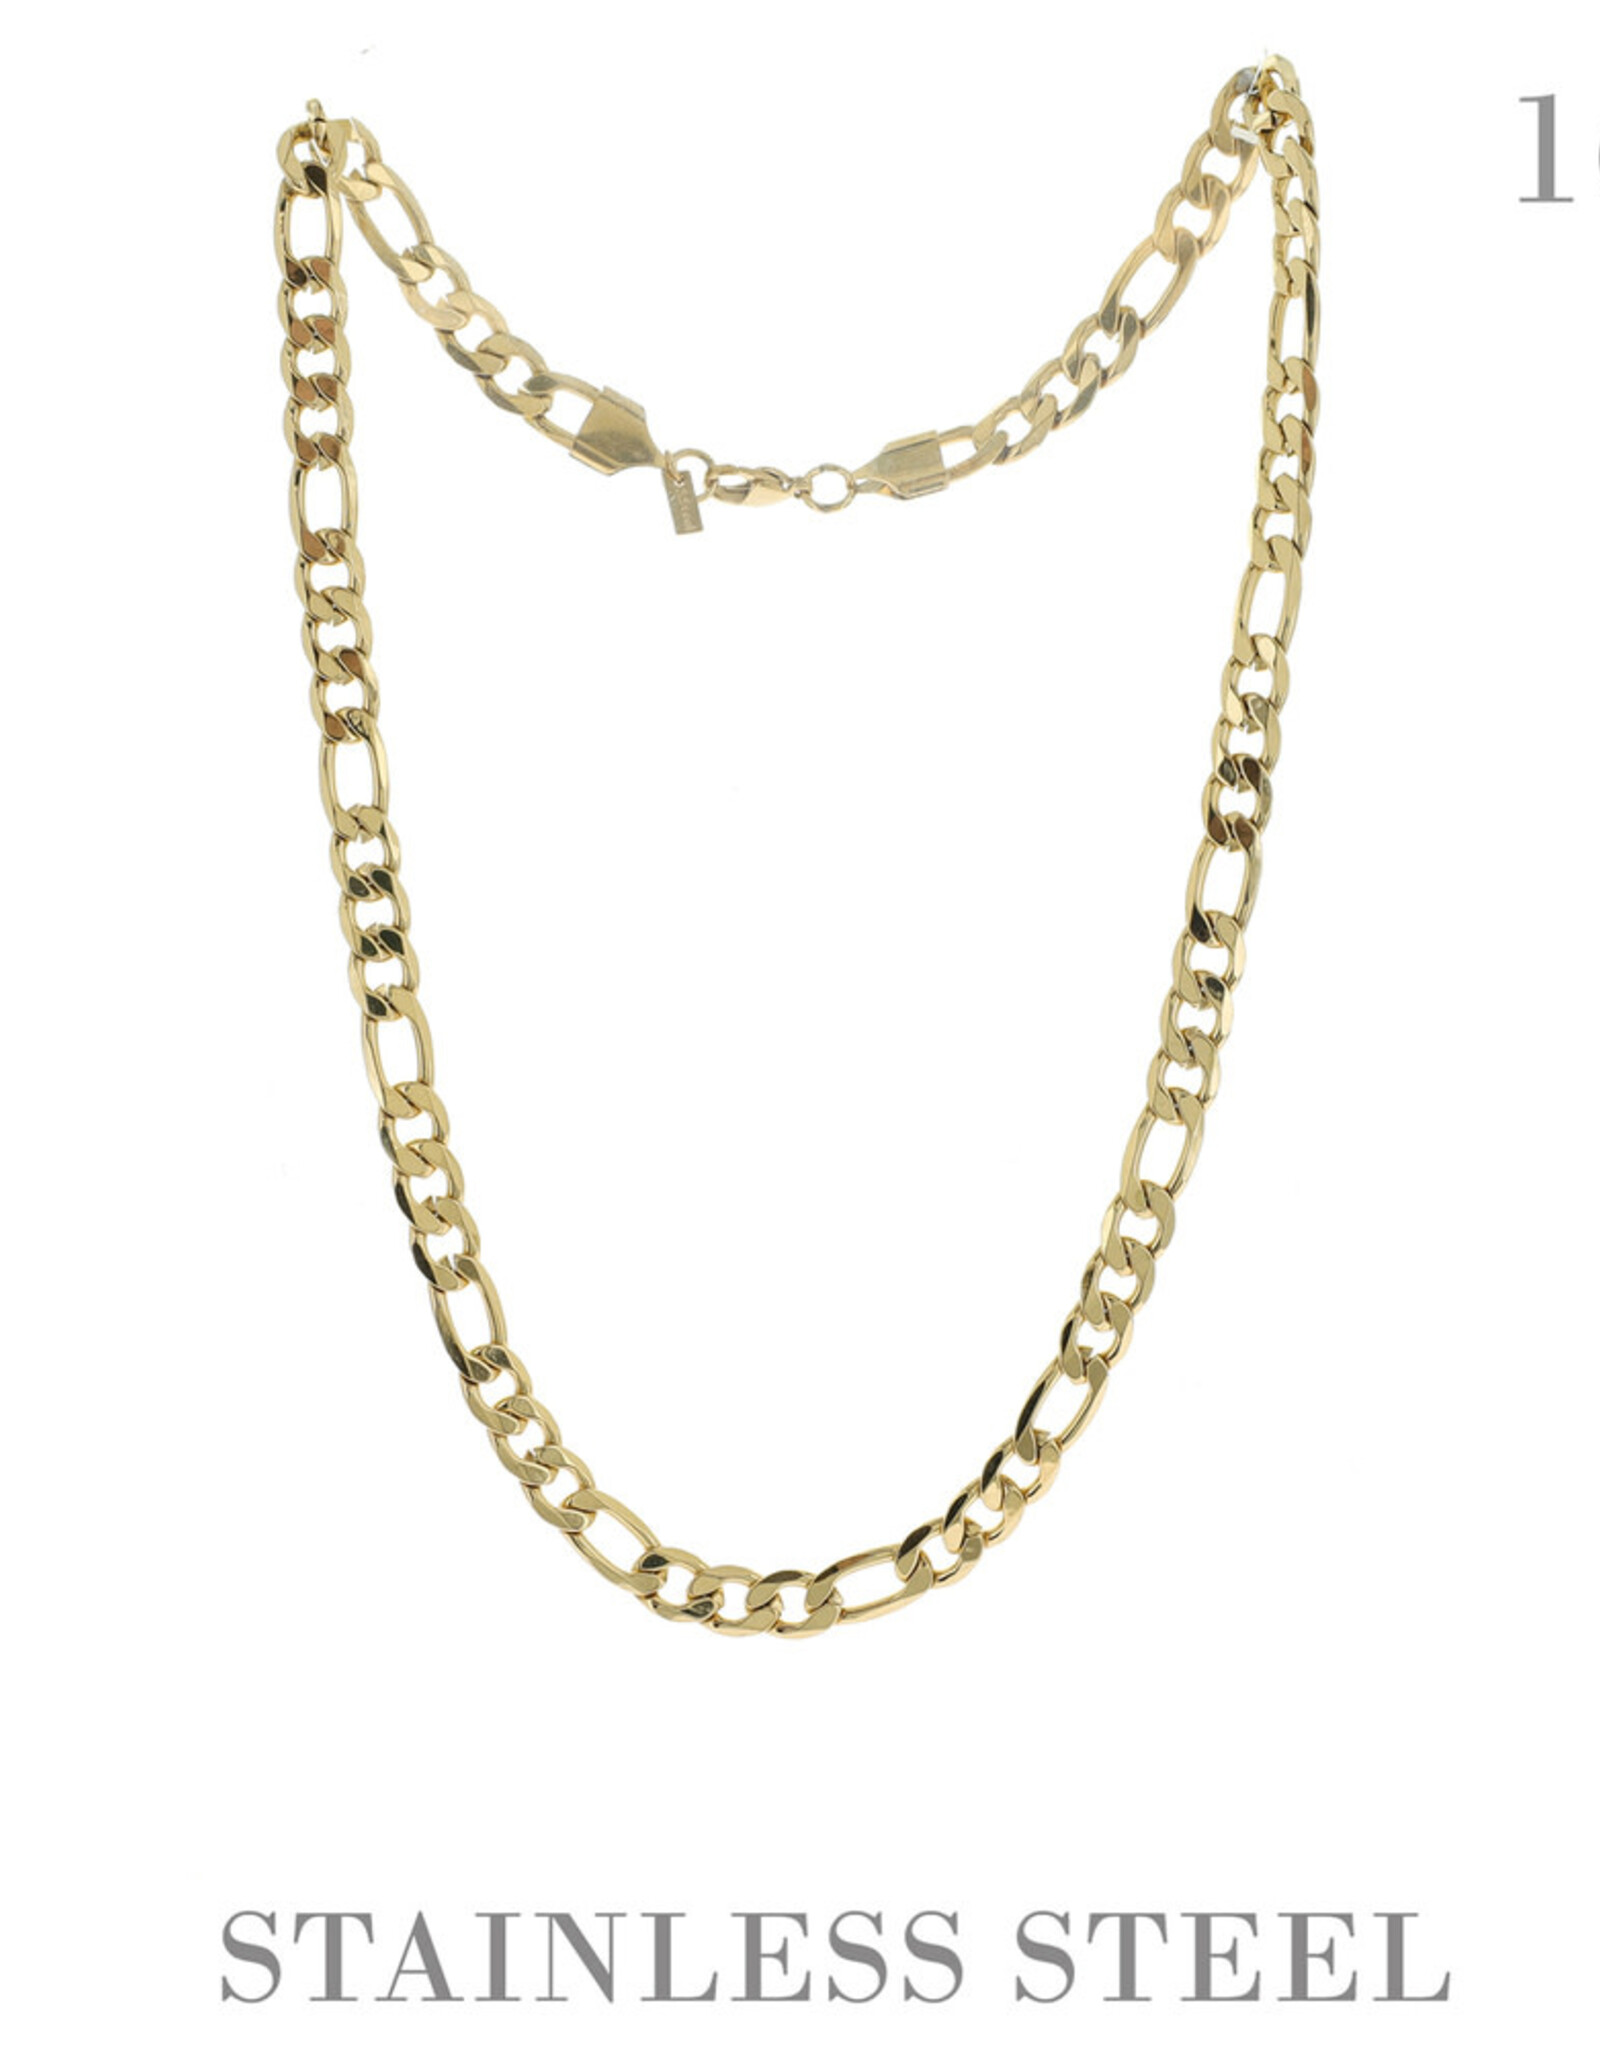 NECKLACE-CHAIN FIGARO 16'